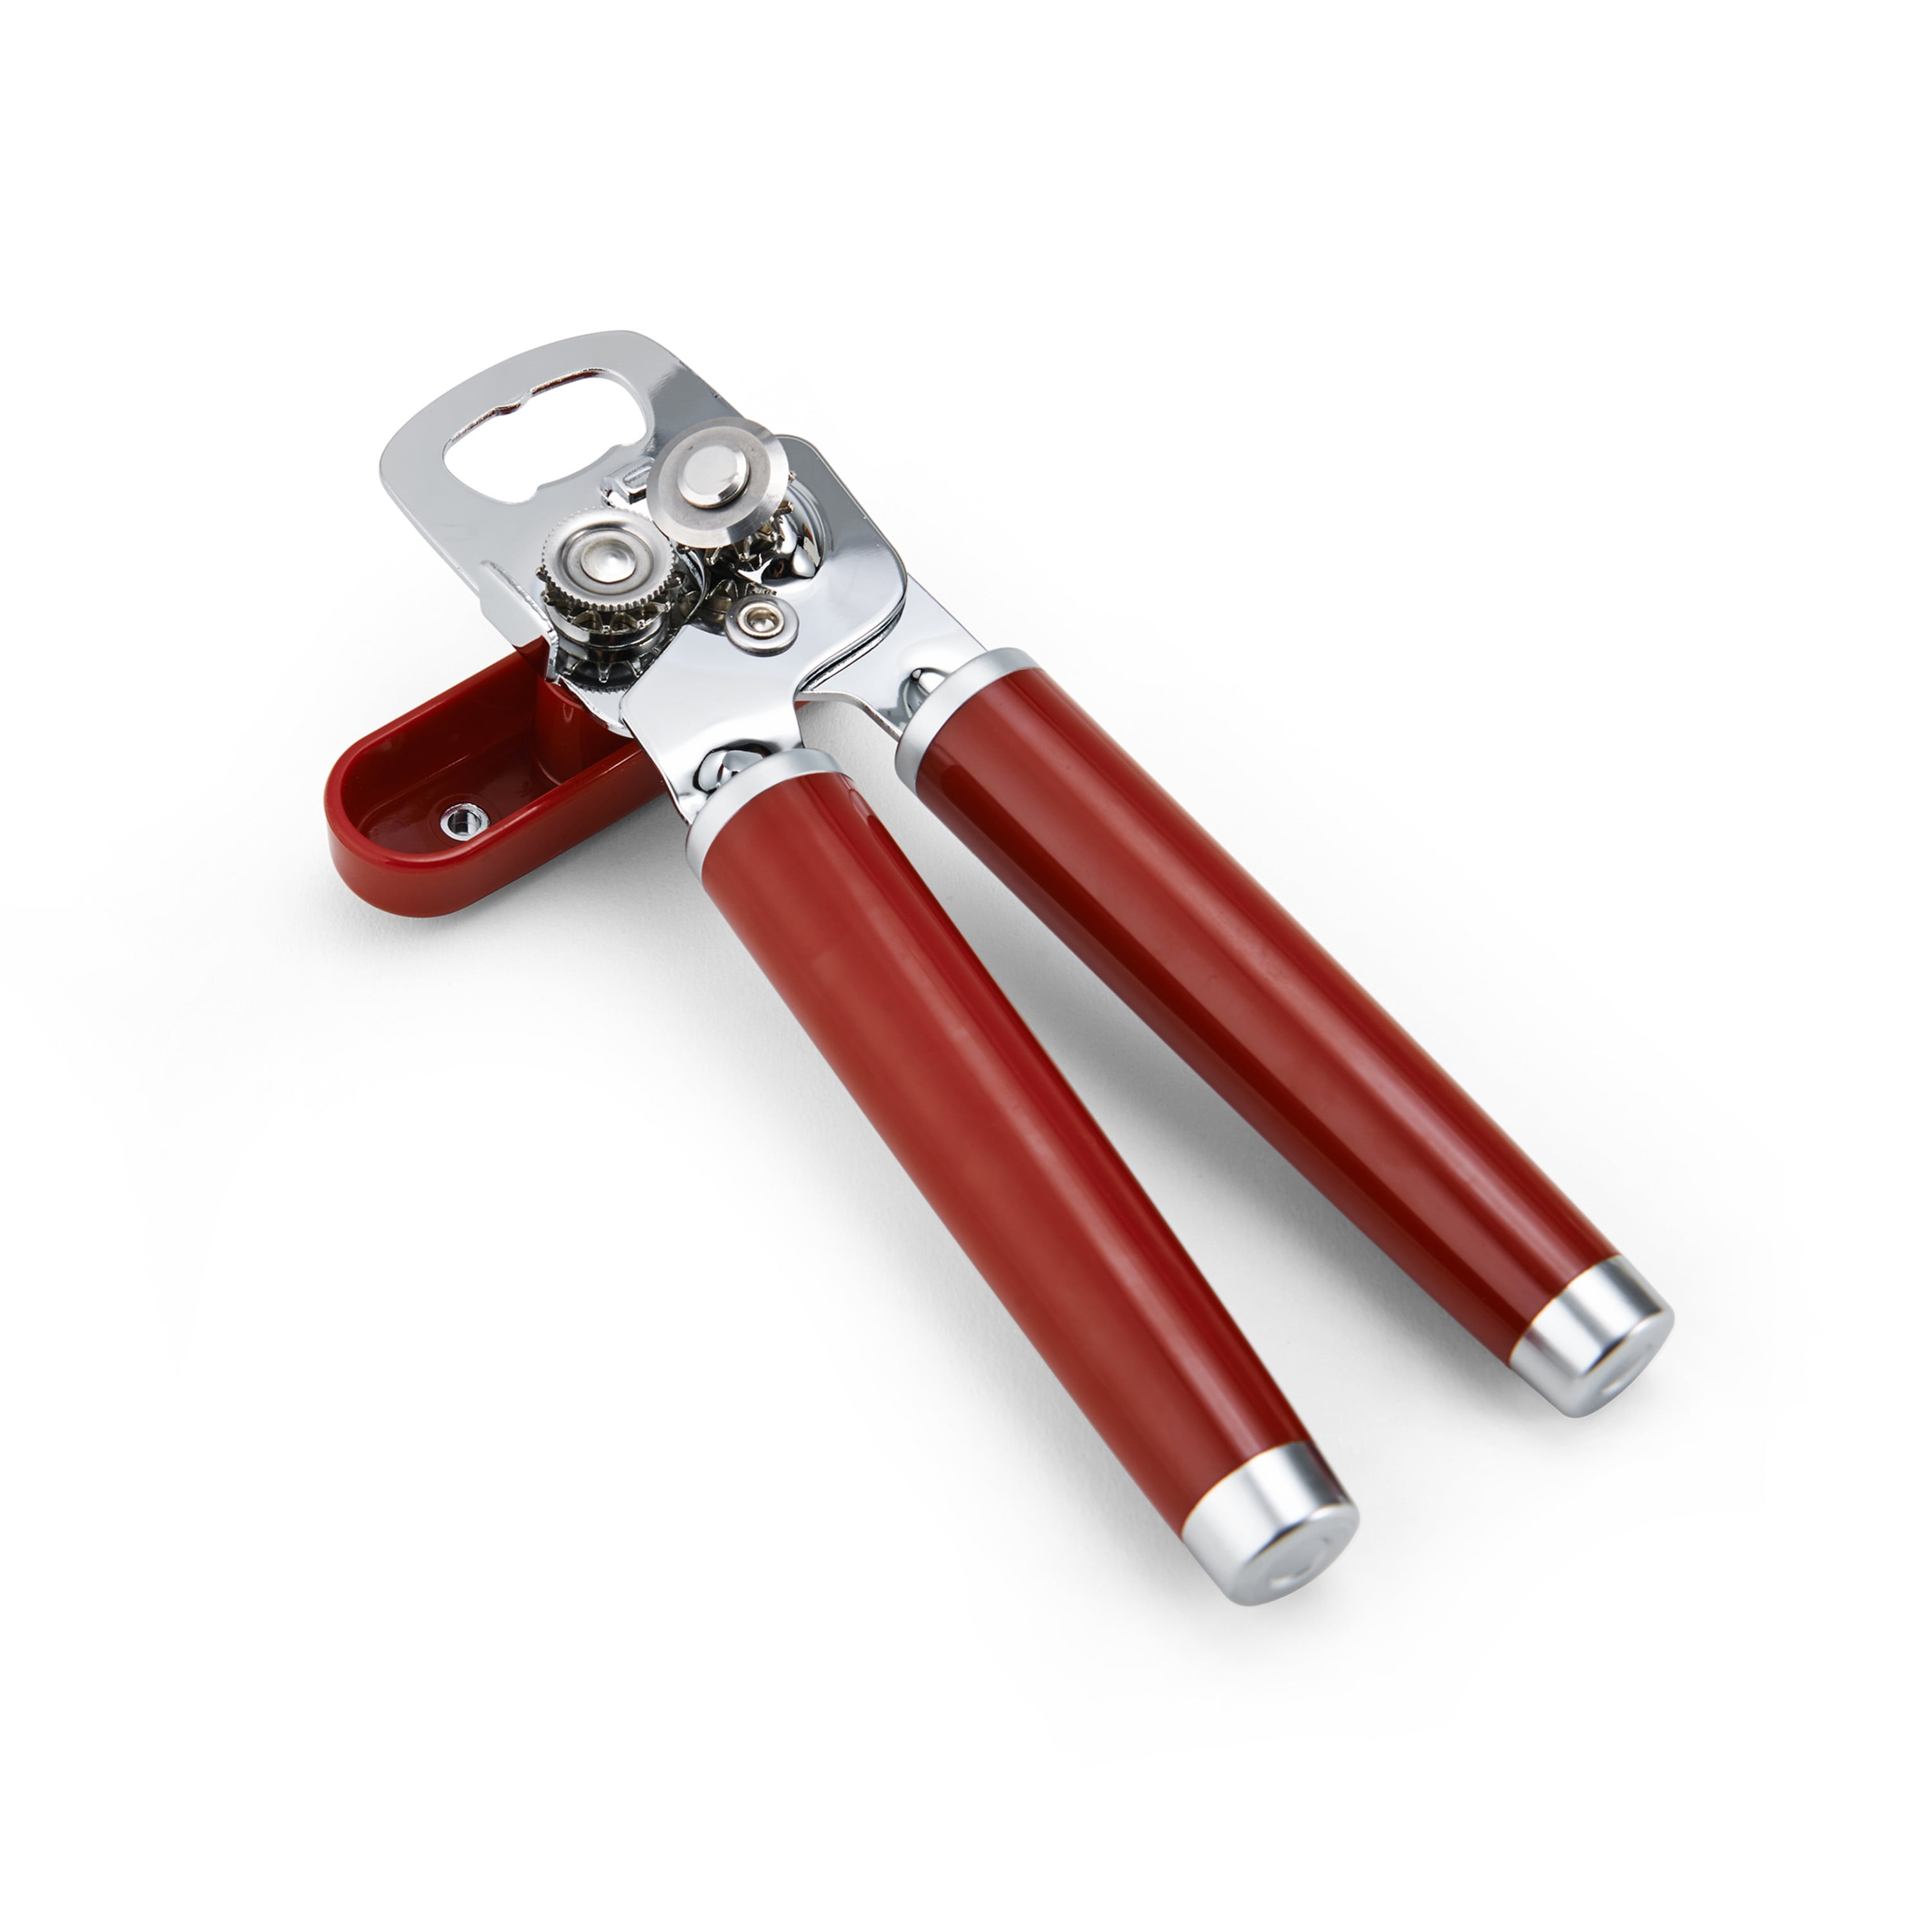 Stainless Steel 21 x 5 x 4 cm KitchenAid KitchenaAid Can Opener-Empire Red 